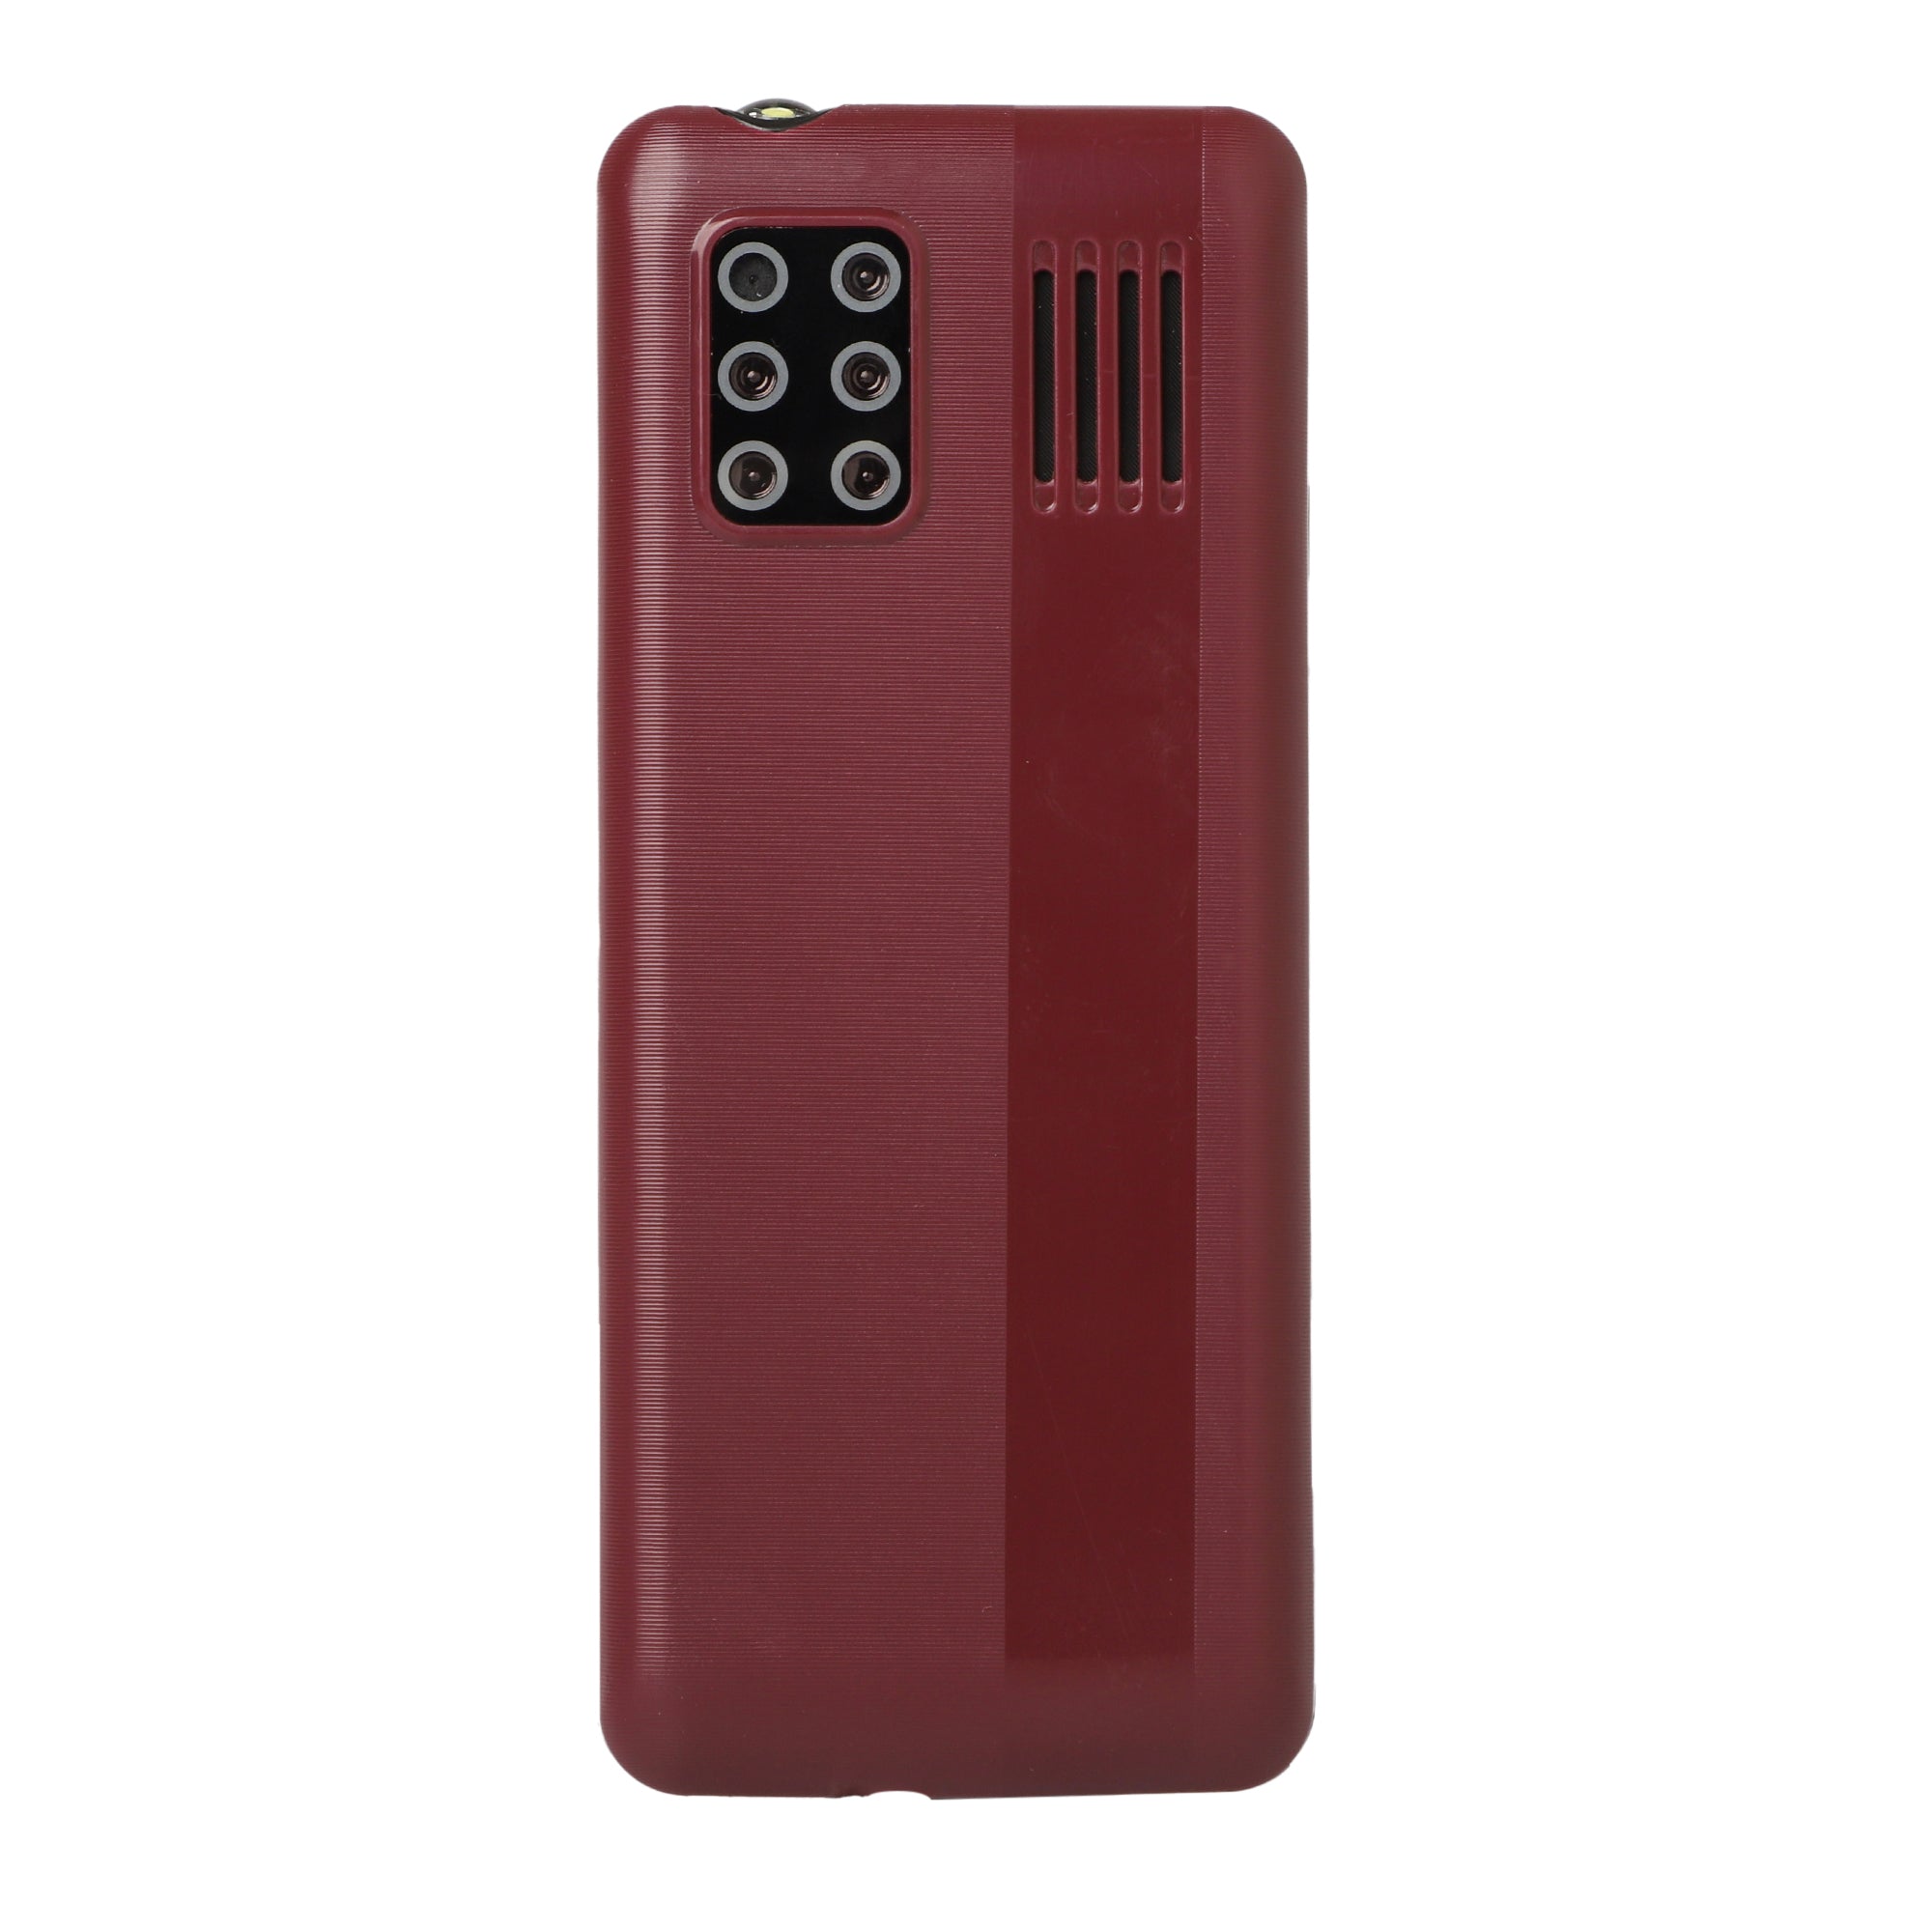 Ringme Duke Mobile Phone Feature Phone with Dual SIM Card, Camera, Auto Call Recording with Torch (Red, 1.77 inch Big screen, 3000mAh Big Battery)